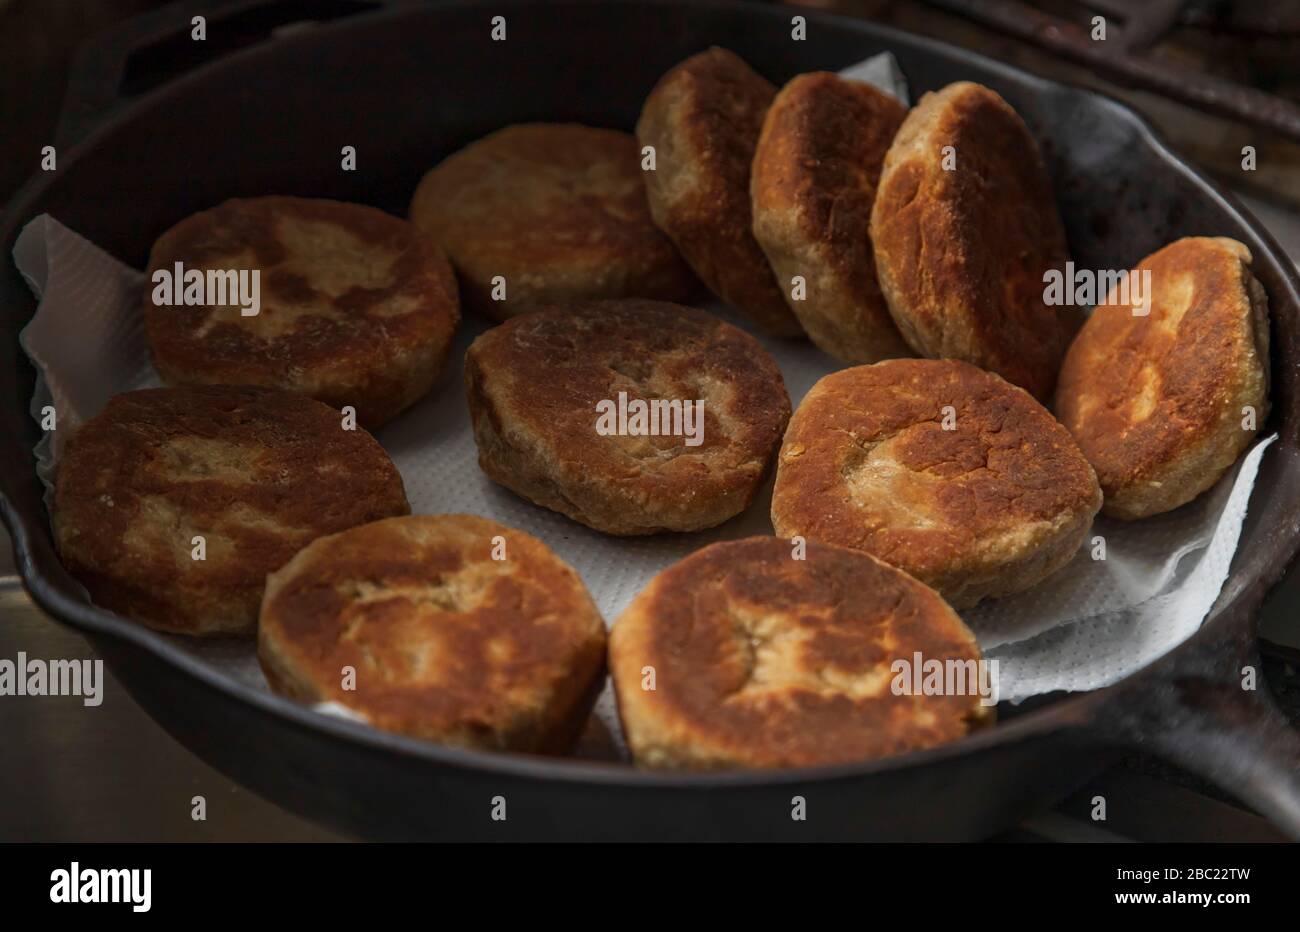 Fried in coconut oil, stove top golden brown whole wheat flour and oatmeal bakes in a pan, popular West Indian tasty delicious healthy breakfast food Stock Photo